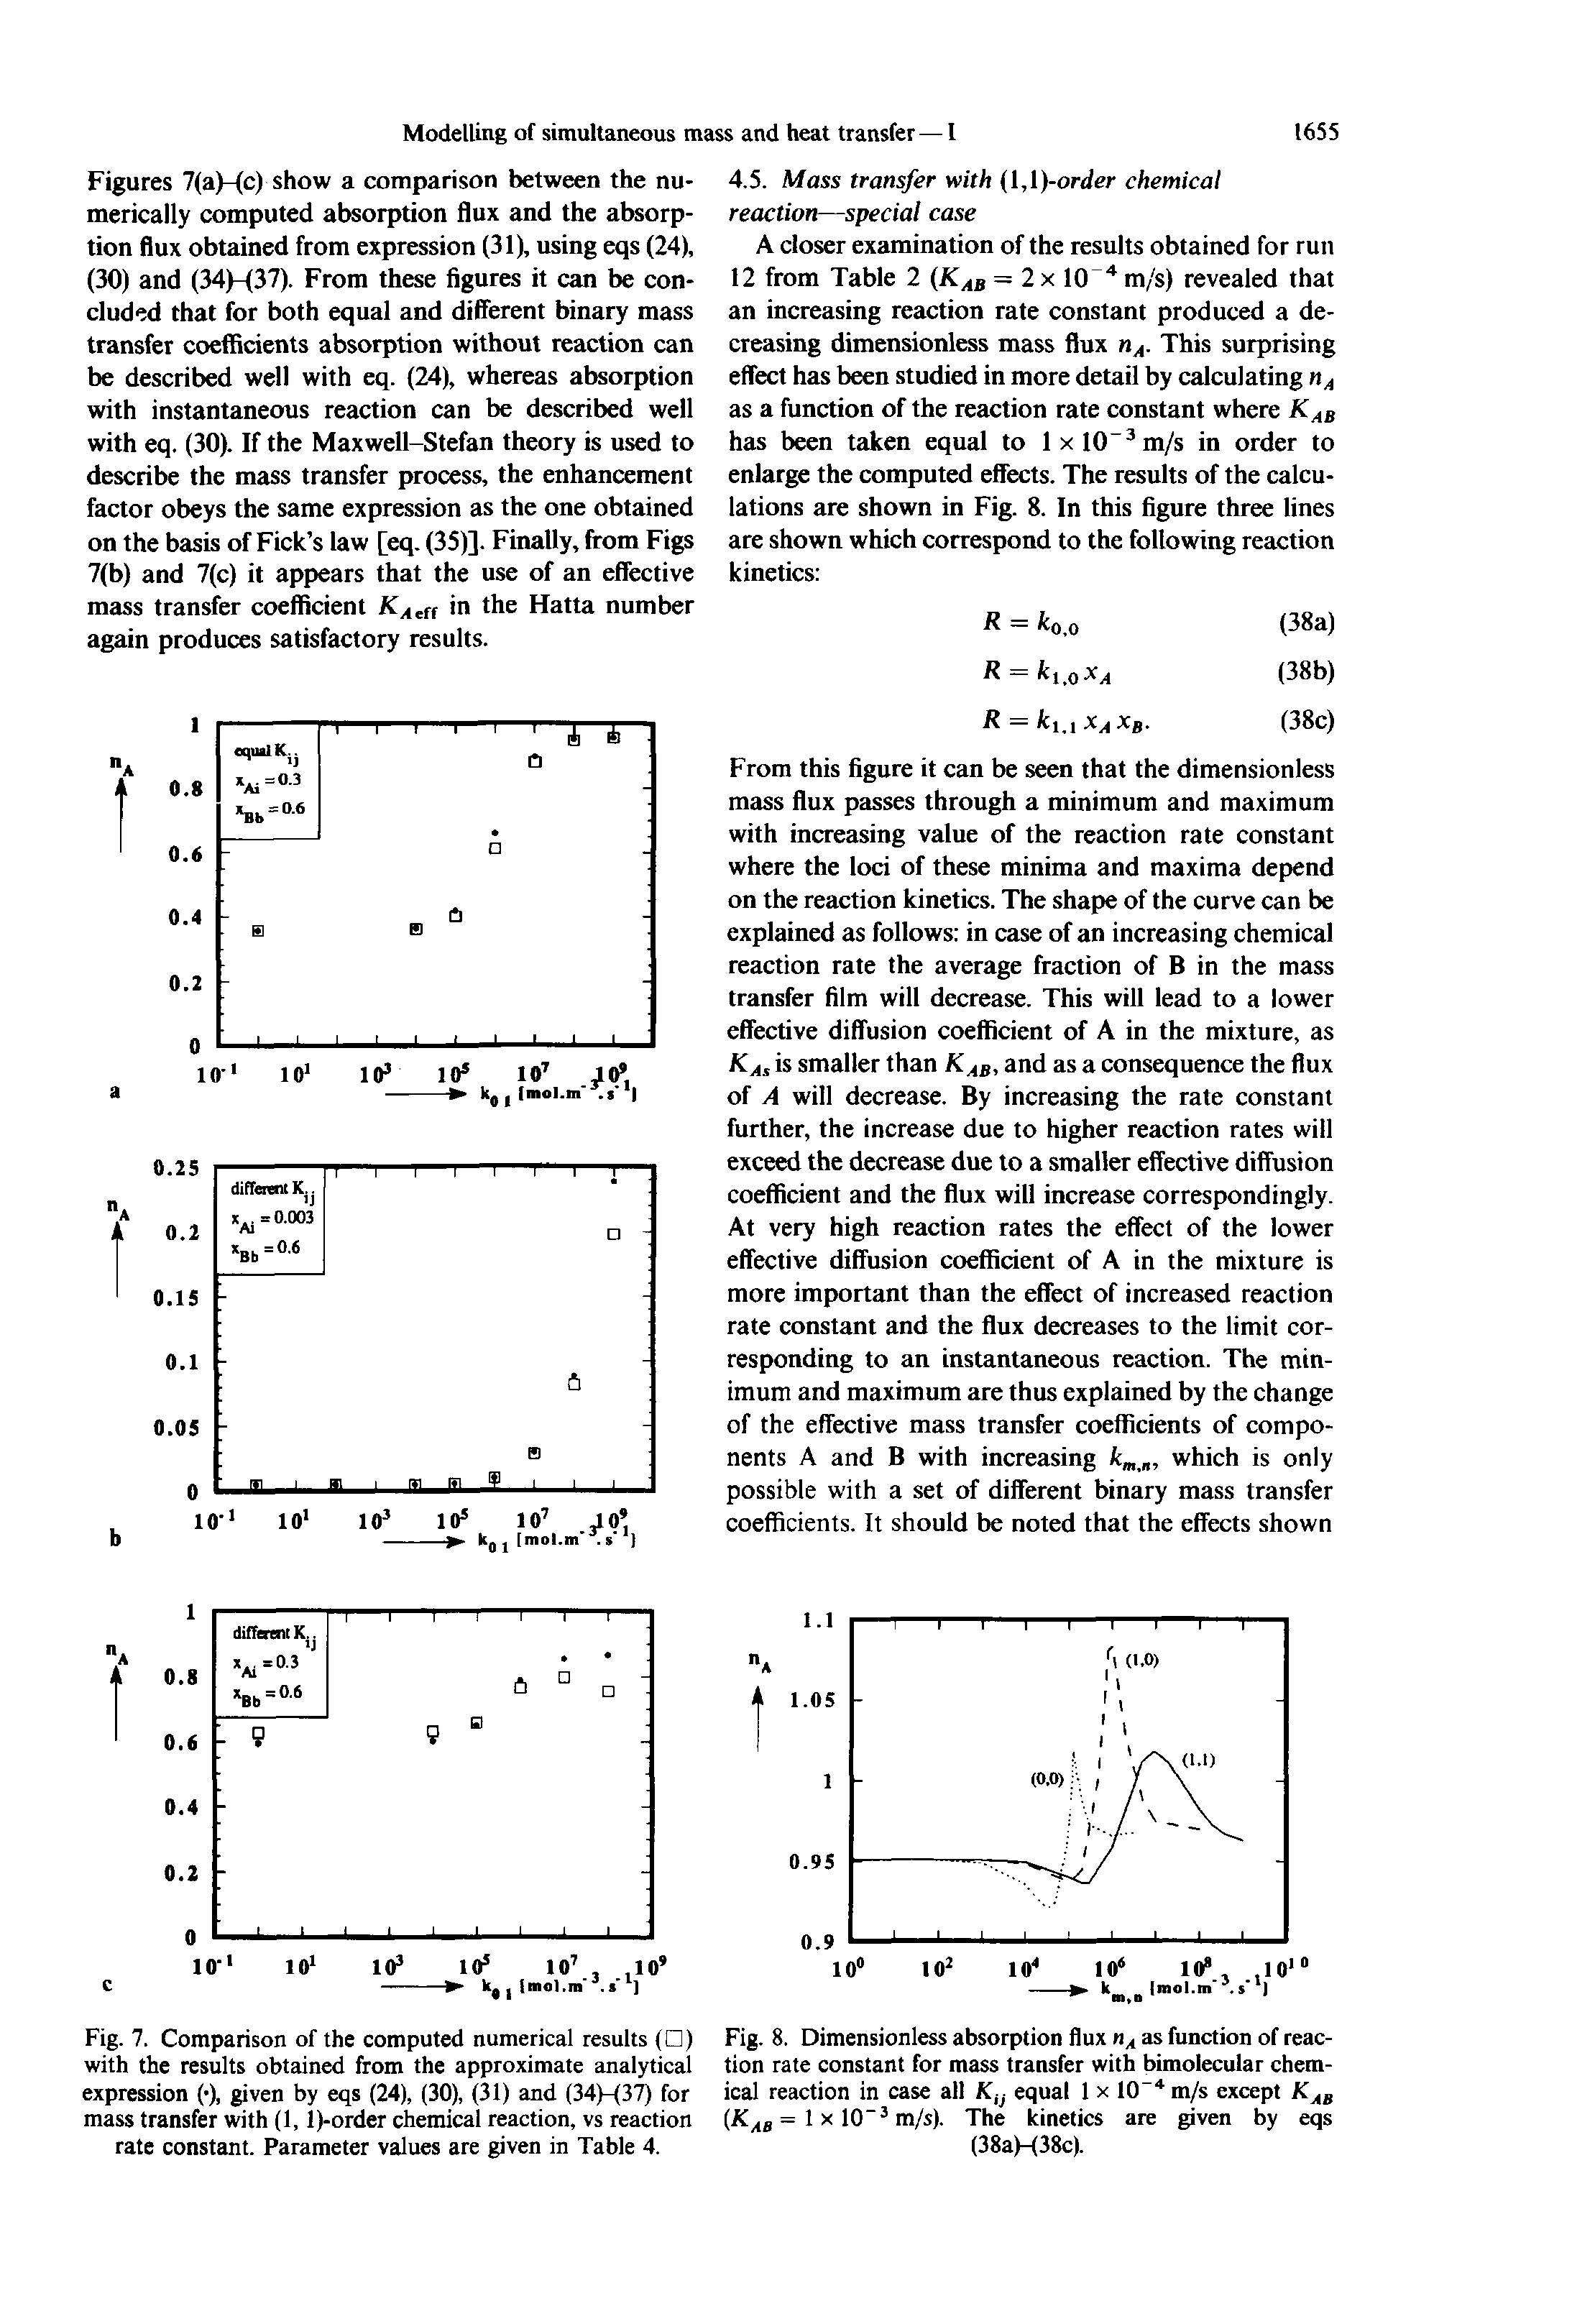 Fig. 8. Dimensionless absorption flux as function of reaction rate constant for mass transfer with bimolecular chemical reaction in case all K,j equal 1 x 10 m/s except K g = 1 X 10" m/s). The kinetics are given by eqs (38a)-(38c).